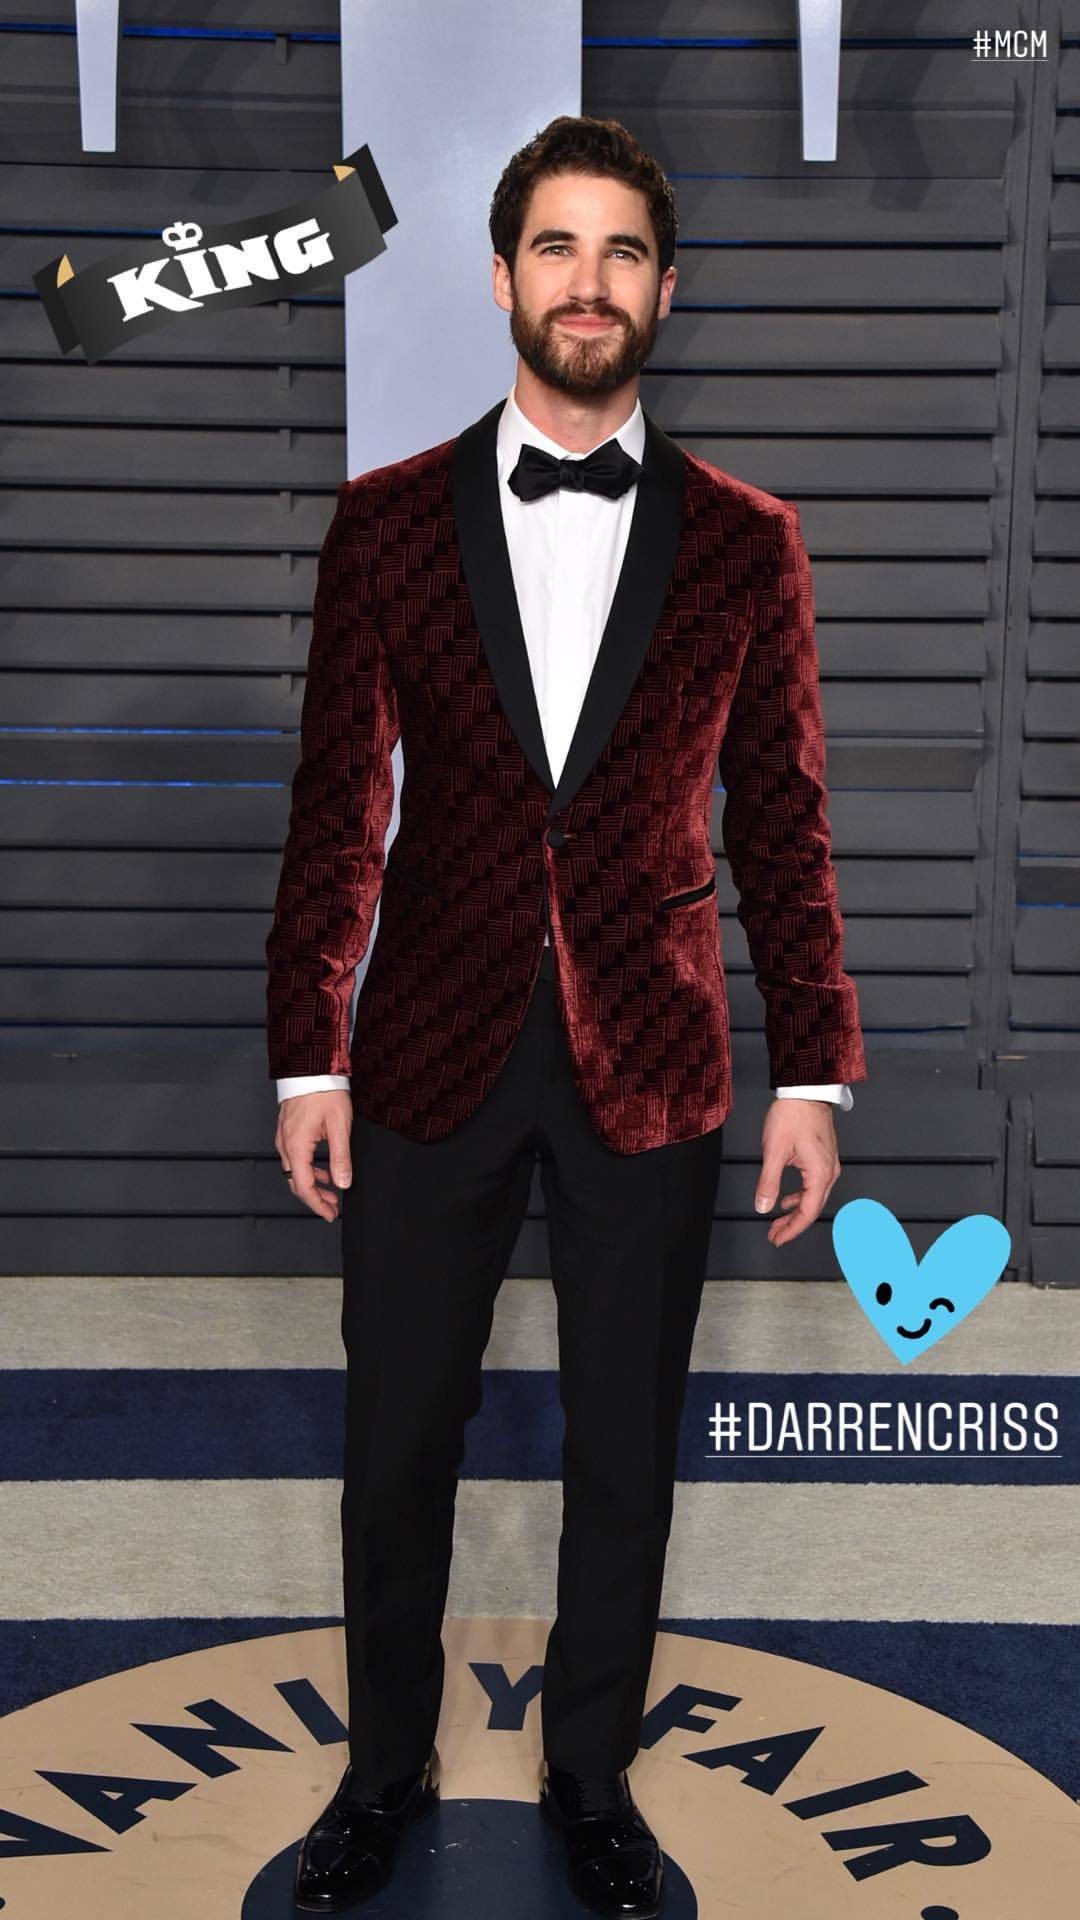 timesup - Darren's Miscellaneous Projects and Events for 2018 - Page 3 Tumblr_p67xapBh3g1wpi2k2o1_1280